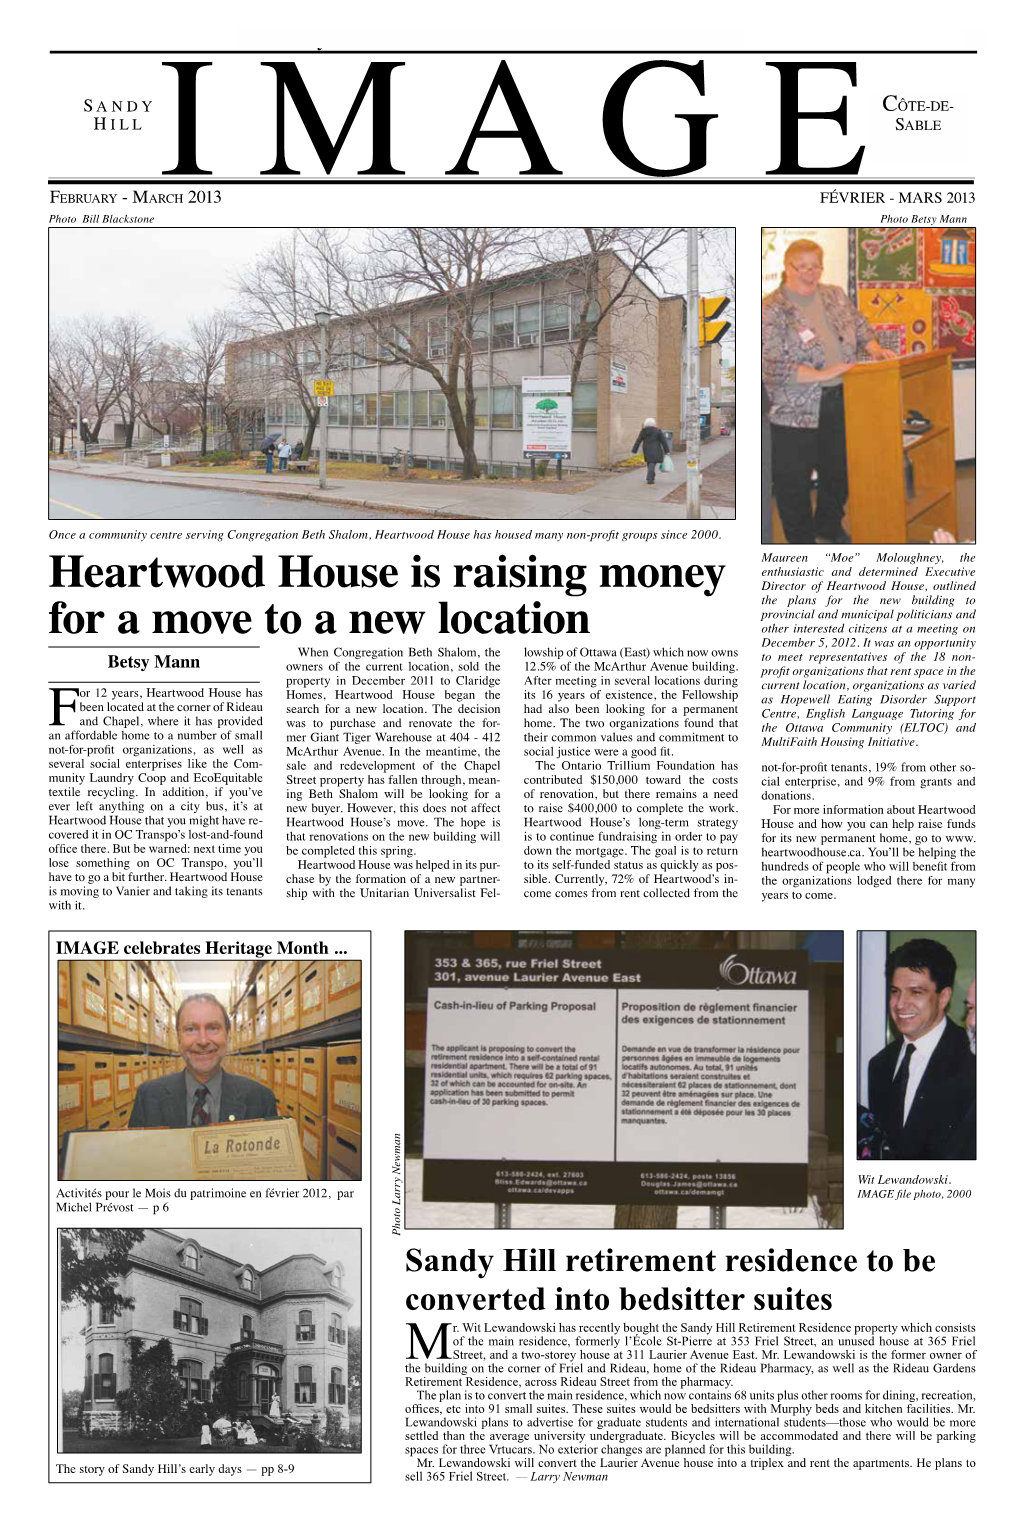 Heartwood House Is Raising Money for a Move to a New Location